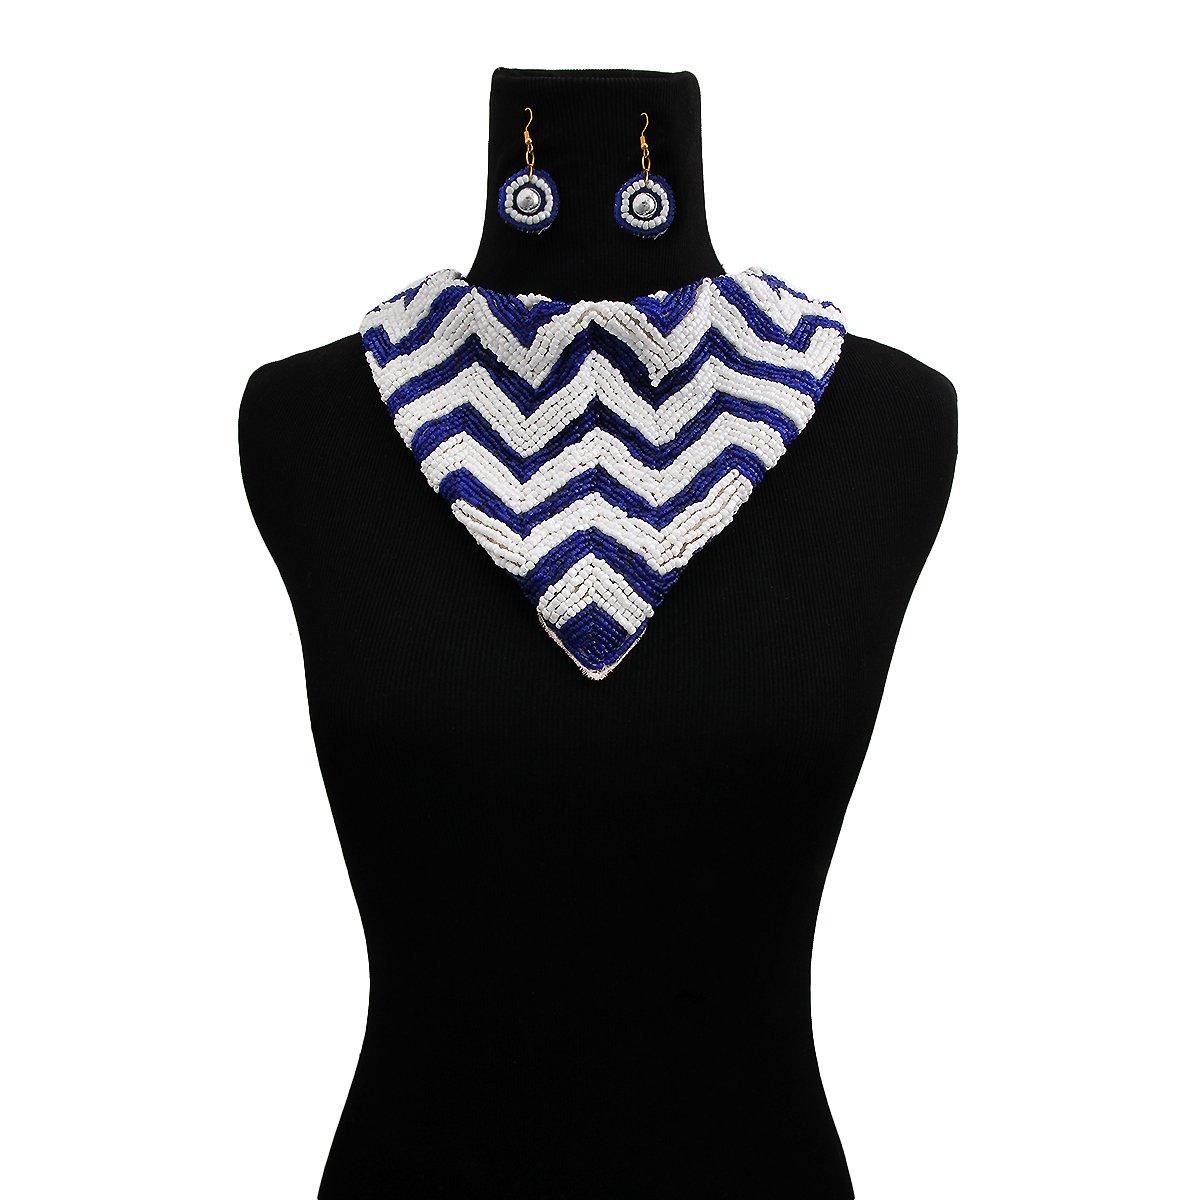 Handmade Embroidered Scarf Necklace Set with Chevron Pattern Blue and White Beads